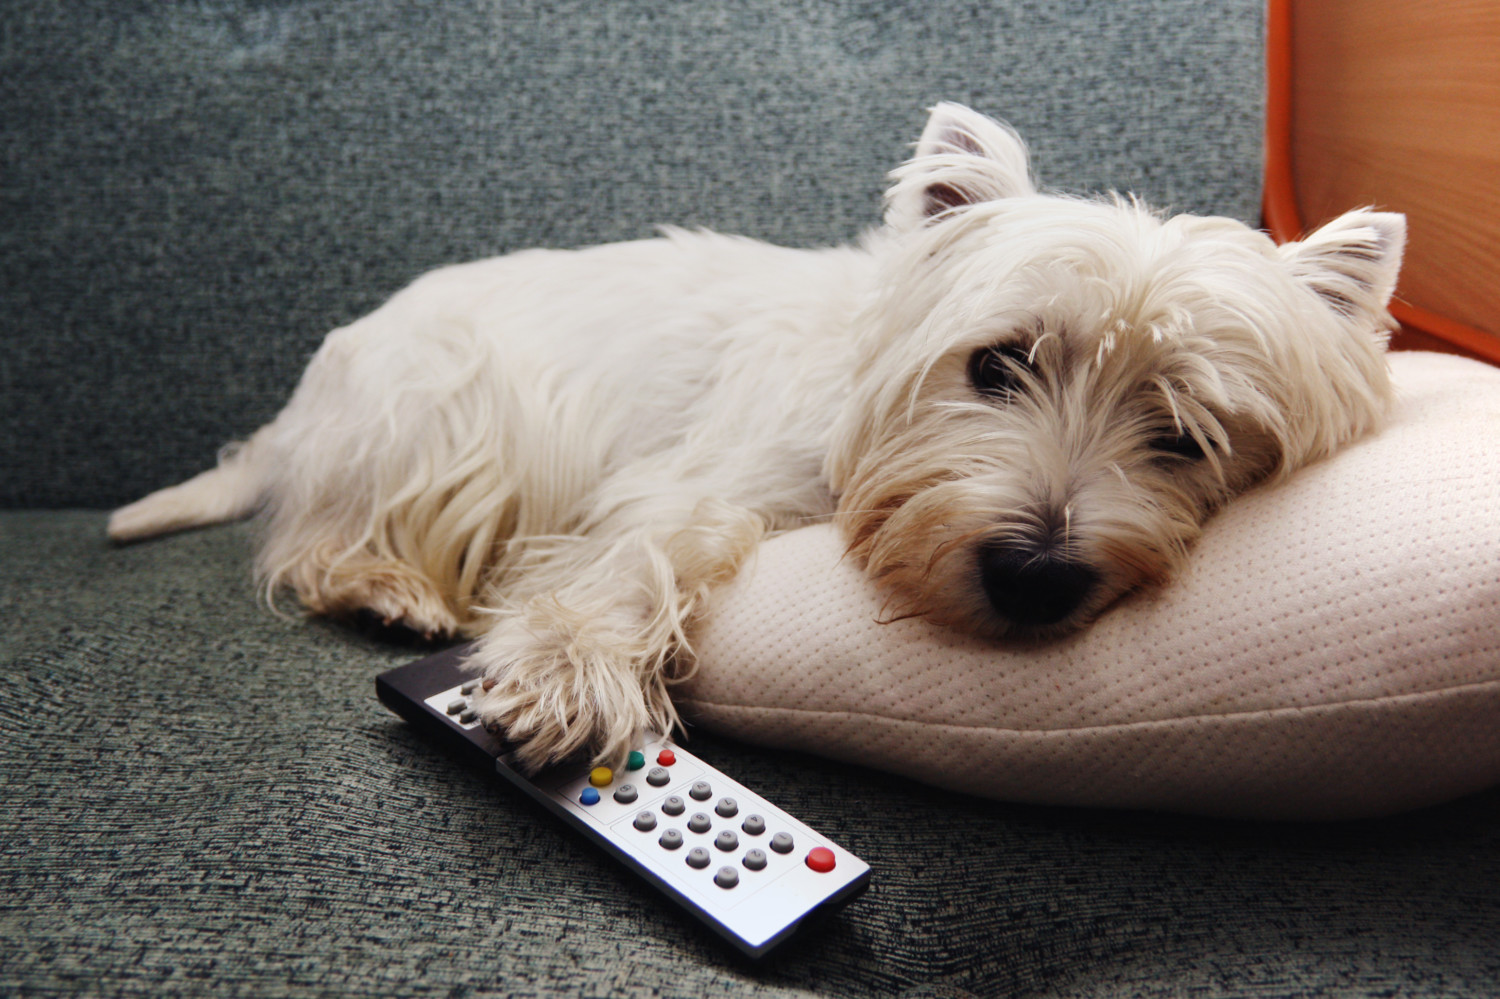 A tired dog rests on a pillow with the TV remote nearby.